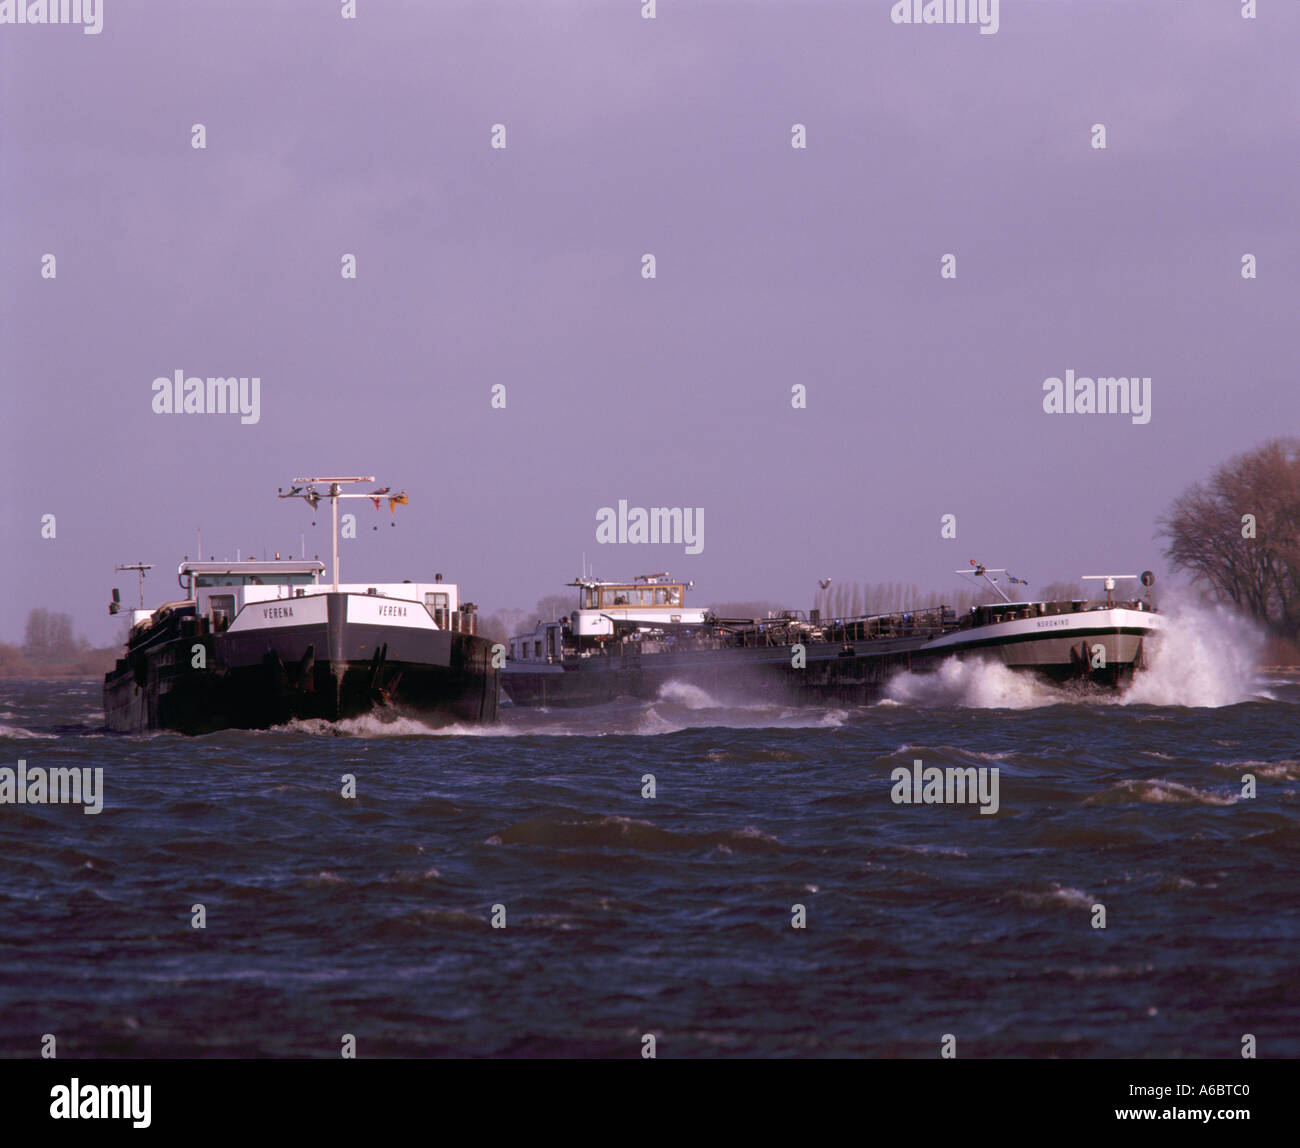 Two barges in storm on River Waal Stock Photo